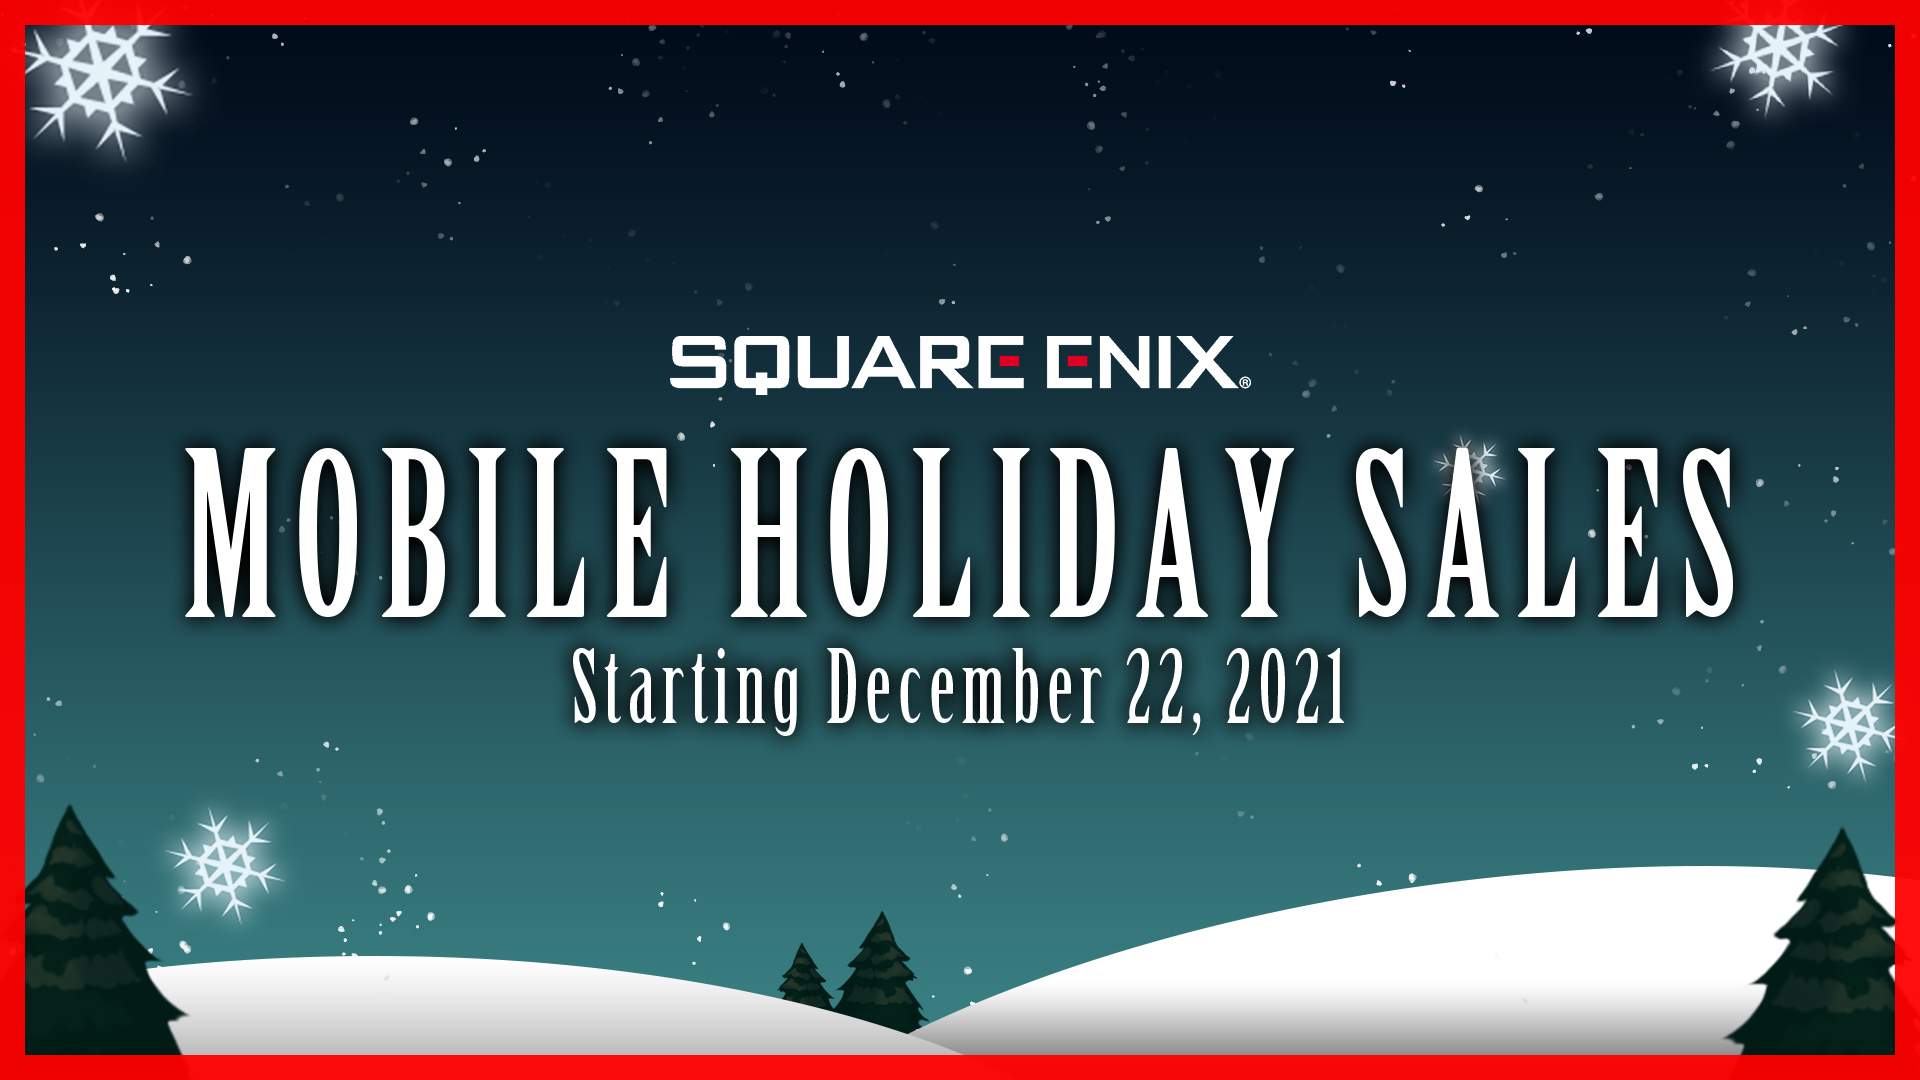 Holiday Sales Starting December 22, 2021 with a festive background